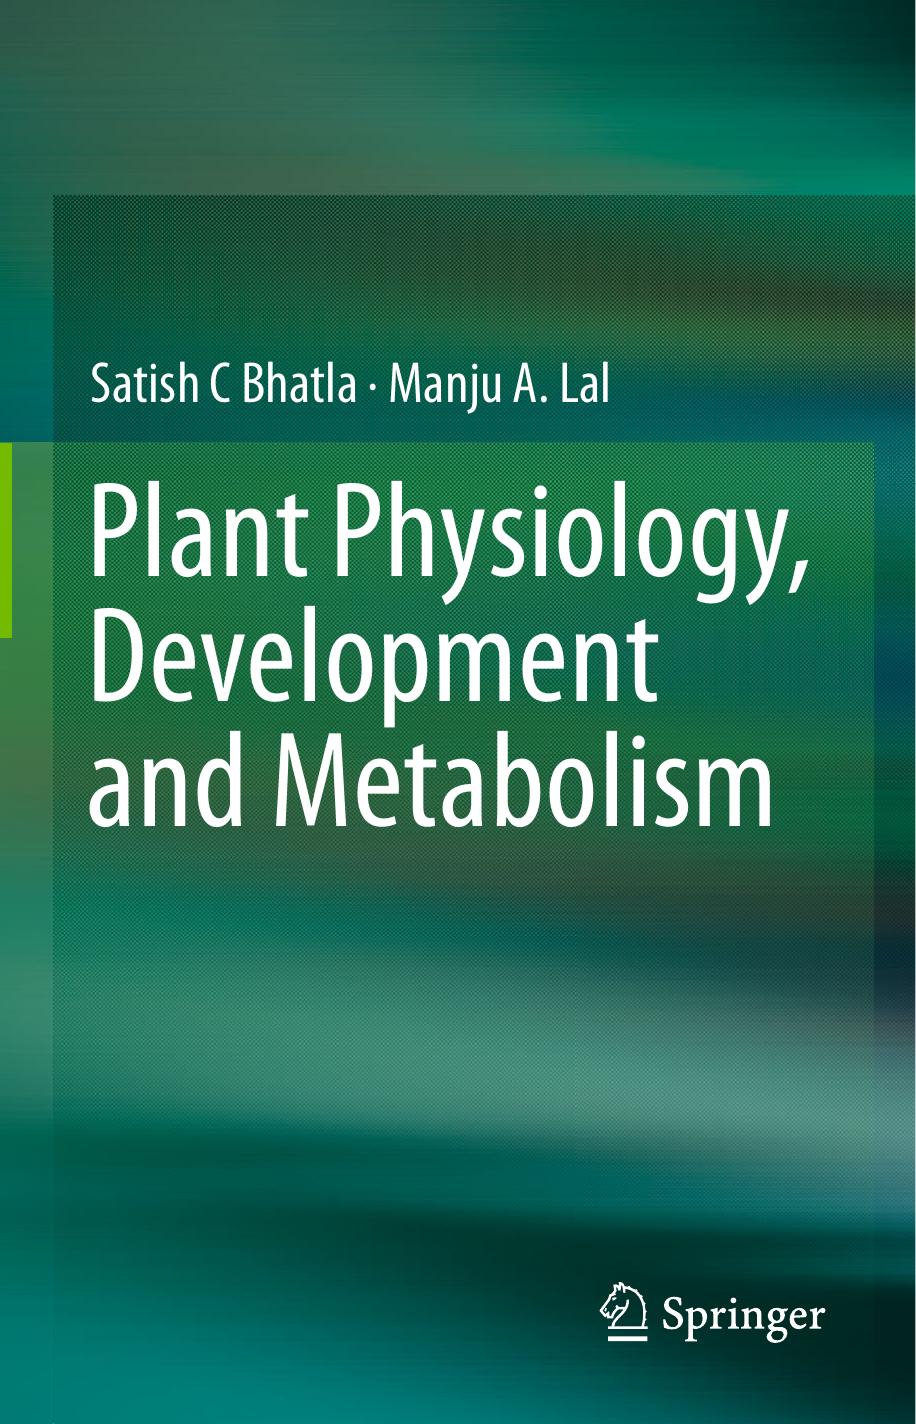 Plant Physiology, Development and Metabolism 2018